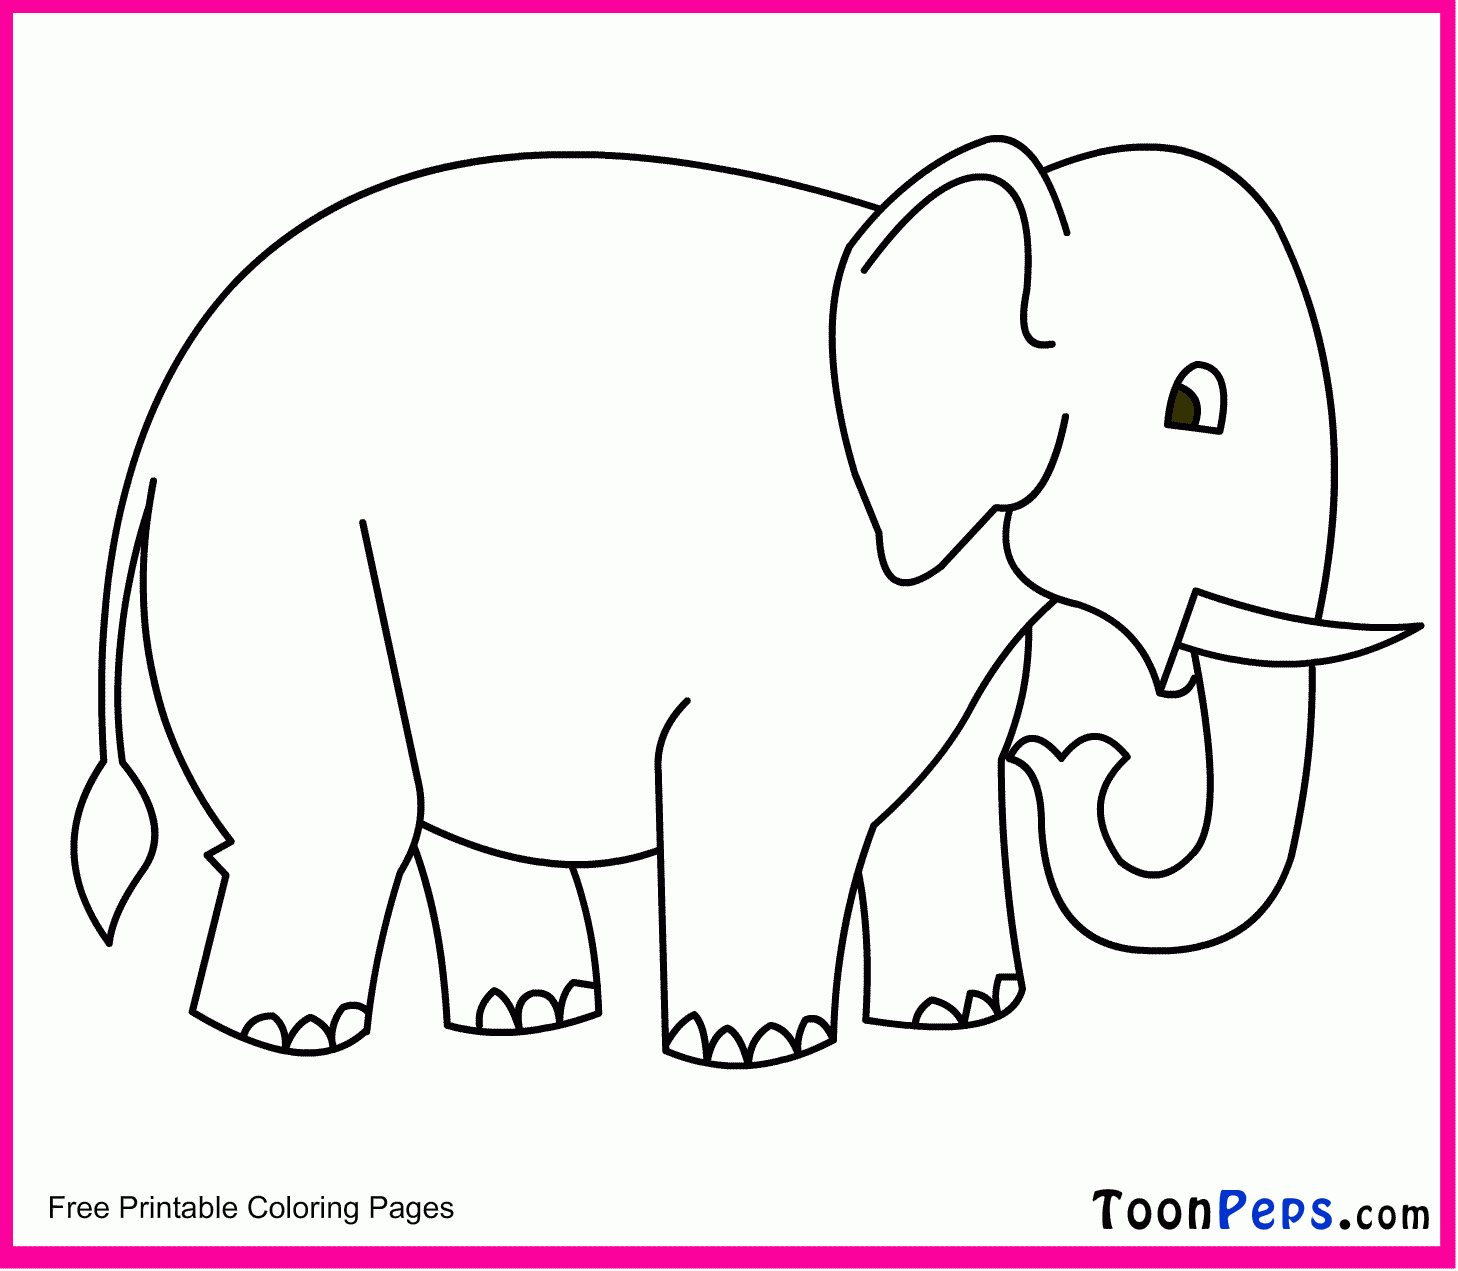 Coloring Pages : Elephant Coloring Book Pages Staggering Toonpeps - Free Printable Elephant Pictures